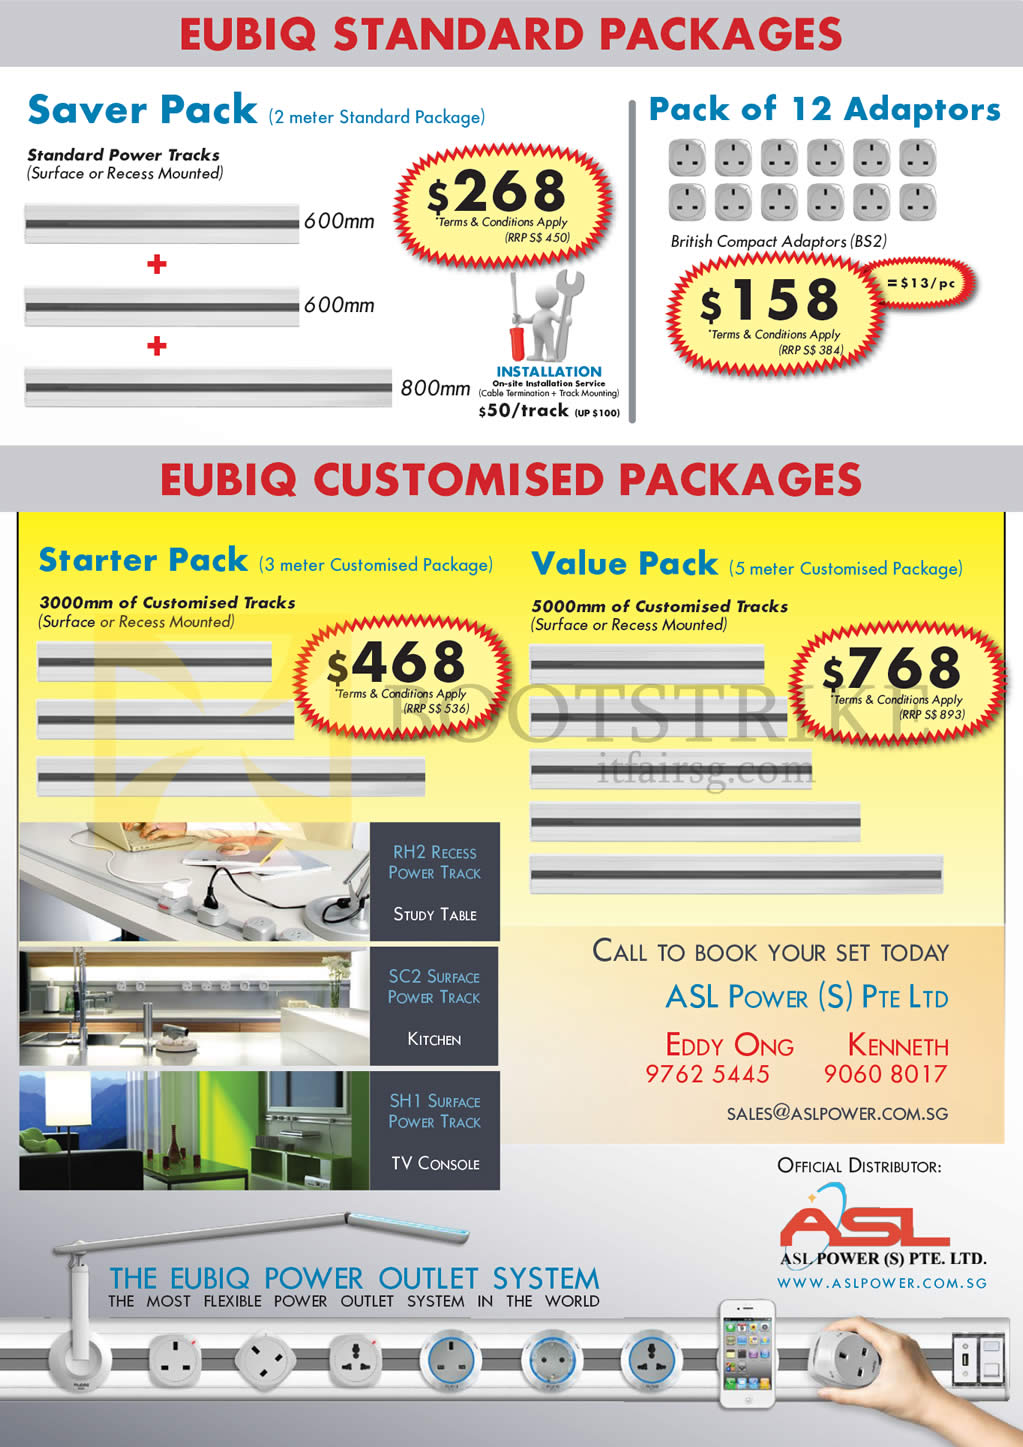 SITEX 2013 price list image brochure of Eubiq ASL Power Saver Pack, 12 Adapters, Packages Starter Pack, Value Pack